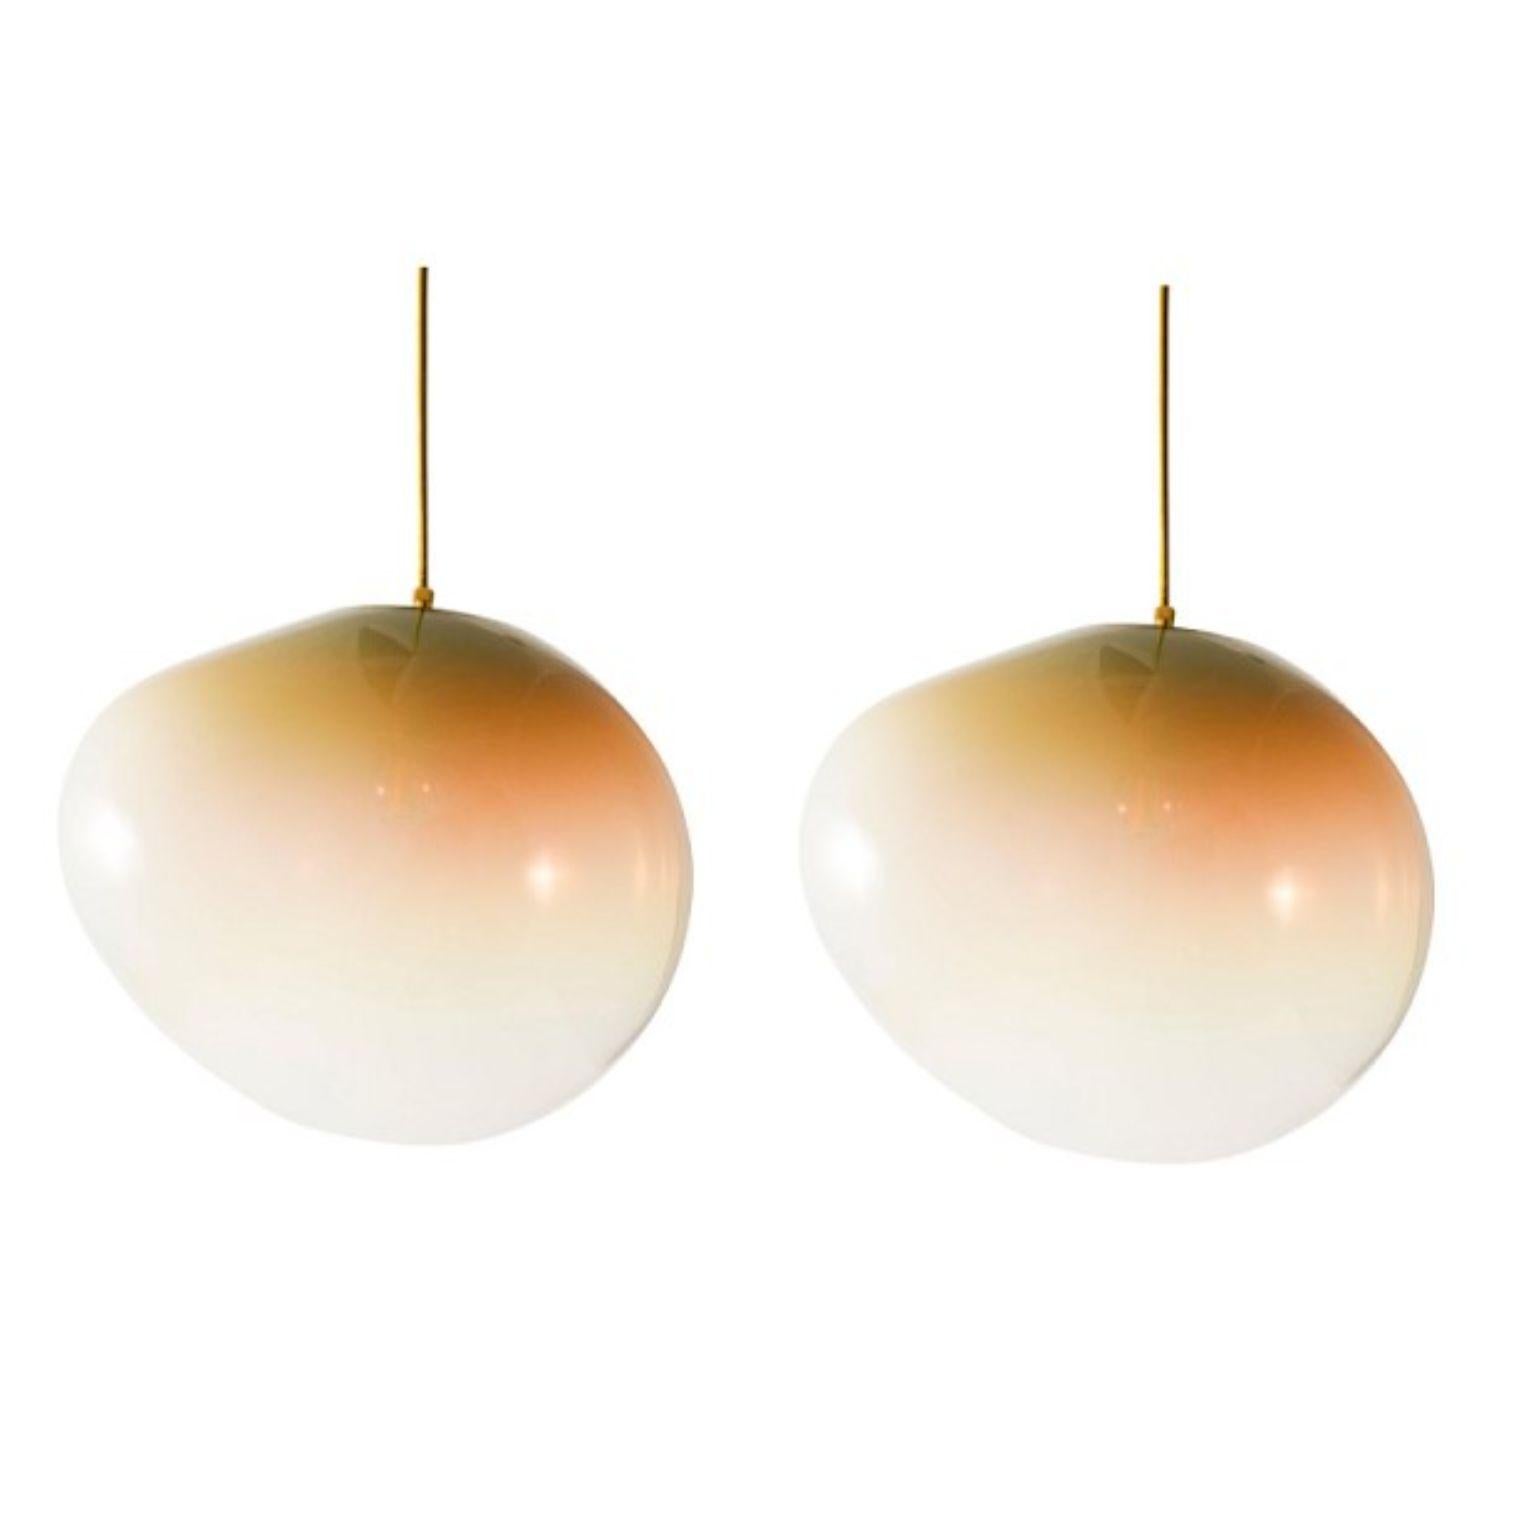 Set of 2 Sirius XL pendants by ELOA
No UL listed 
Material: LED bulb, glass
Dimensions: D38 x W43 x H38 cm
Also available in different colours and dimensions.

All our lamps can be wired according to each country. If sold to the USA it will be wired